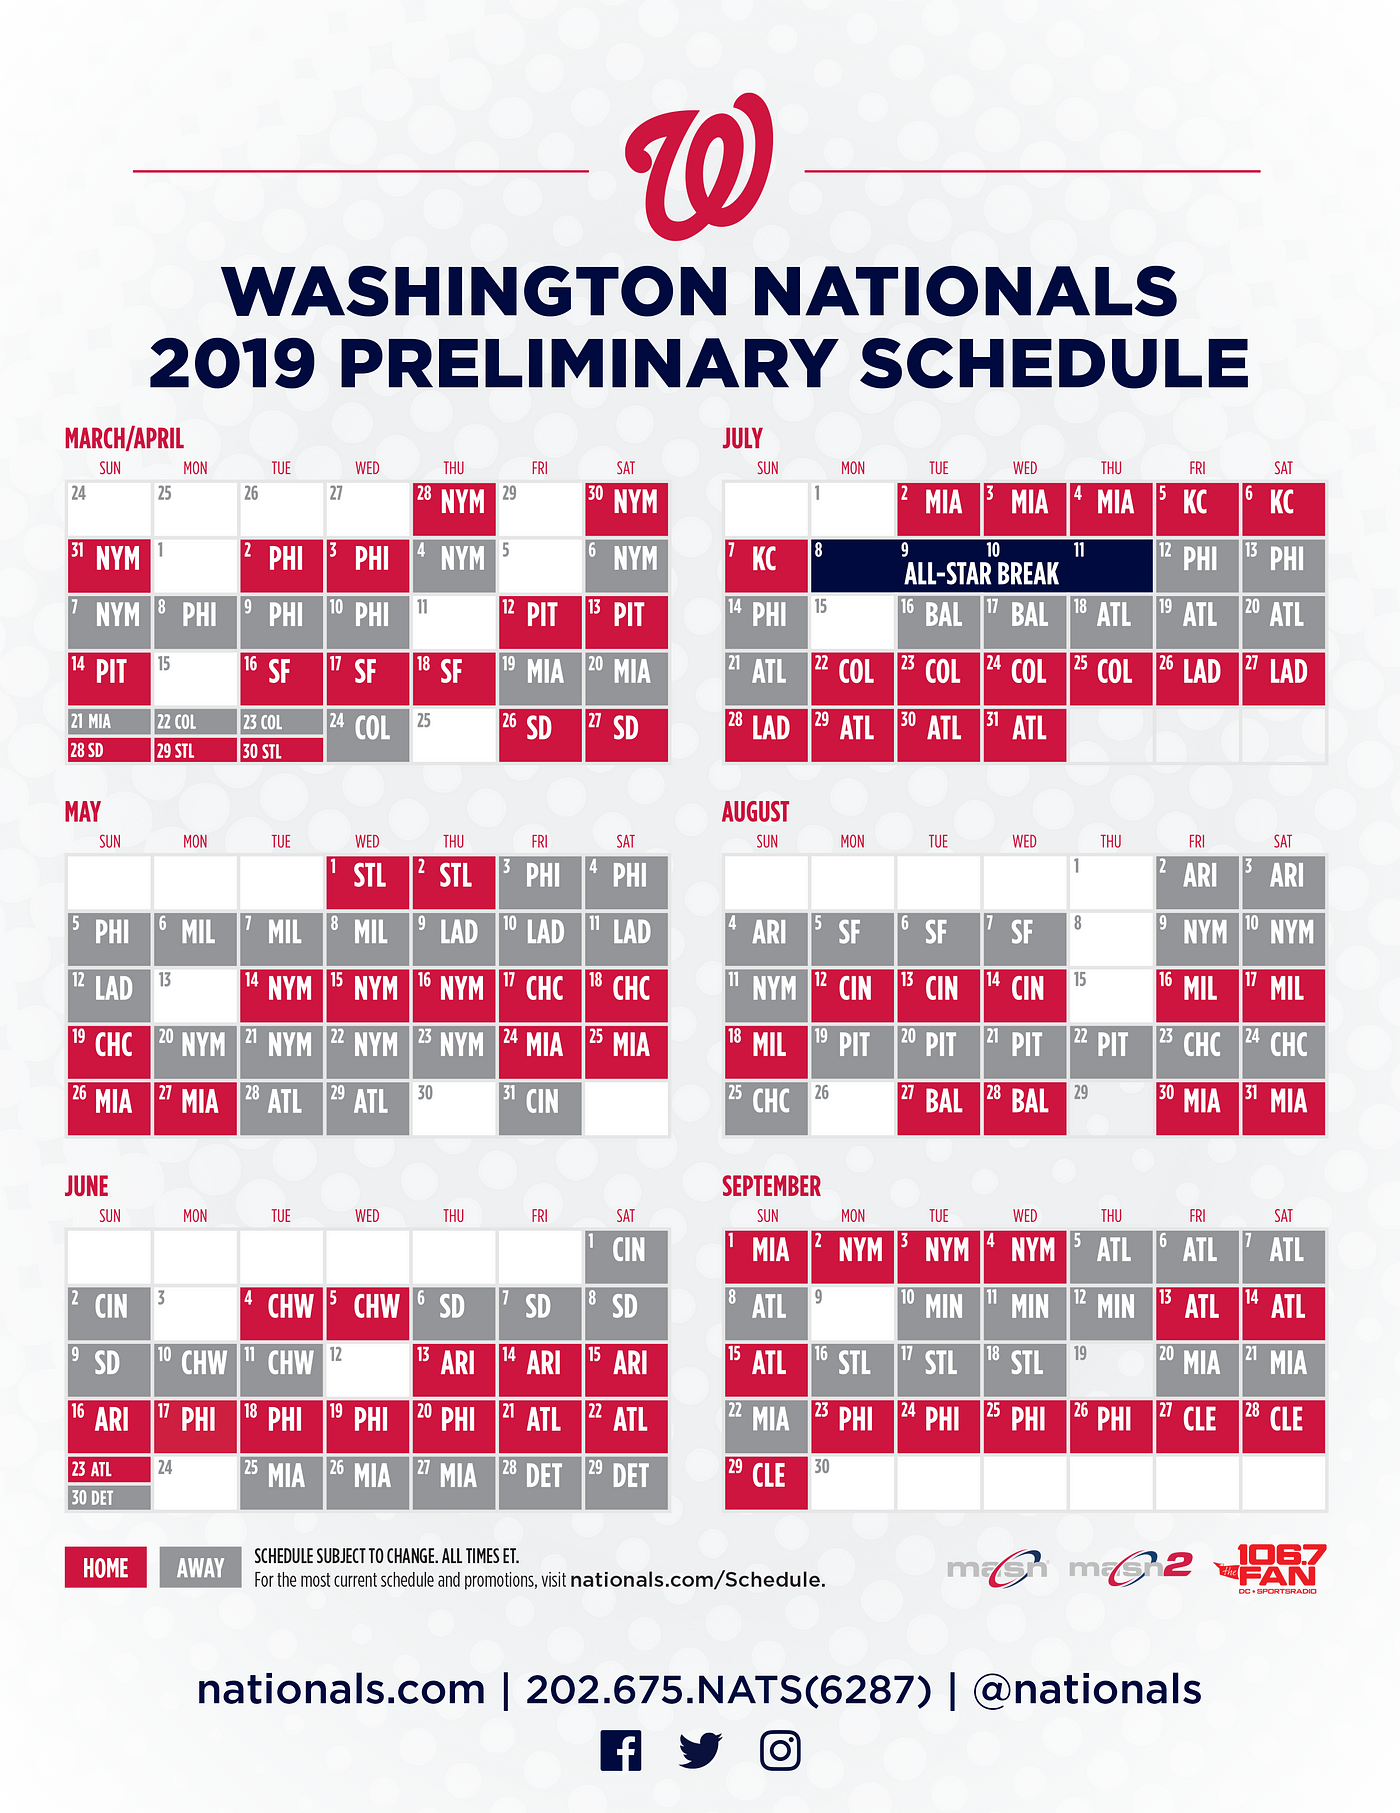 Nationals announce 2019 schedule. The Washington Nationals — in…, by  Nationals Communications